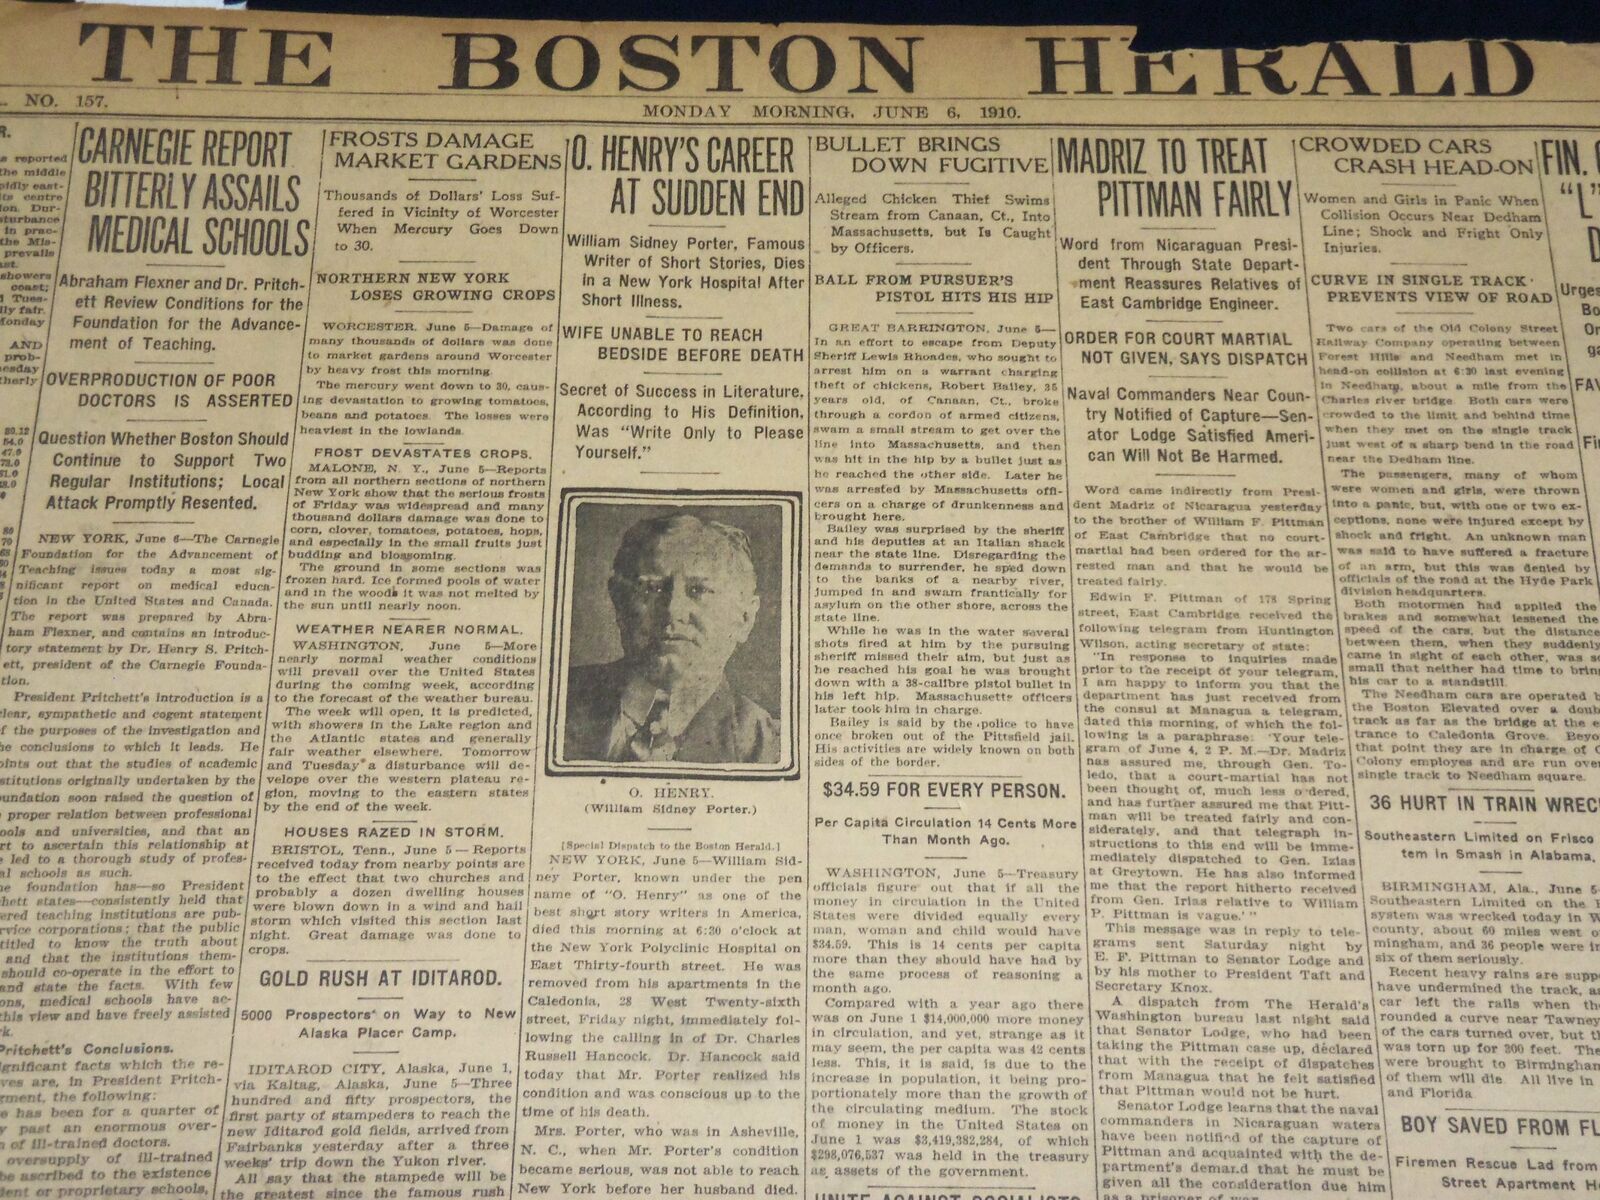 1910 JUNE 6 THE BOSTON HERALD - O. HENRY'S CAREER AT SUDDEN END - BH 330